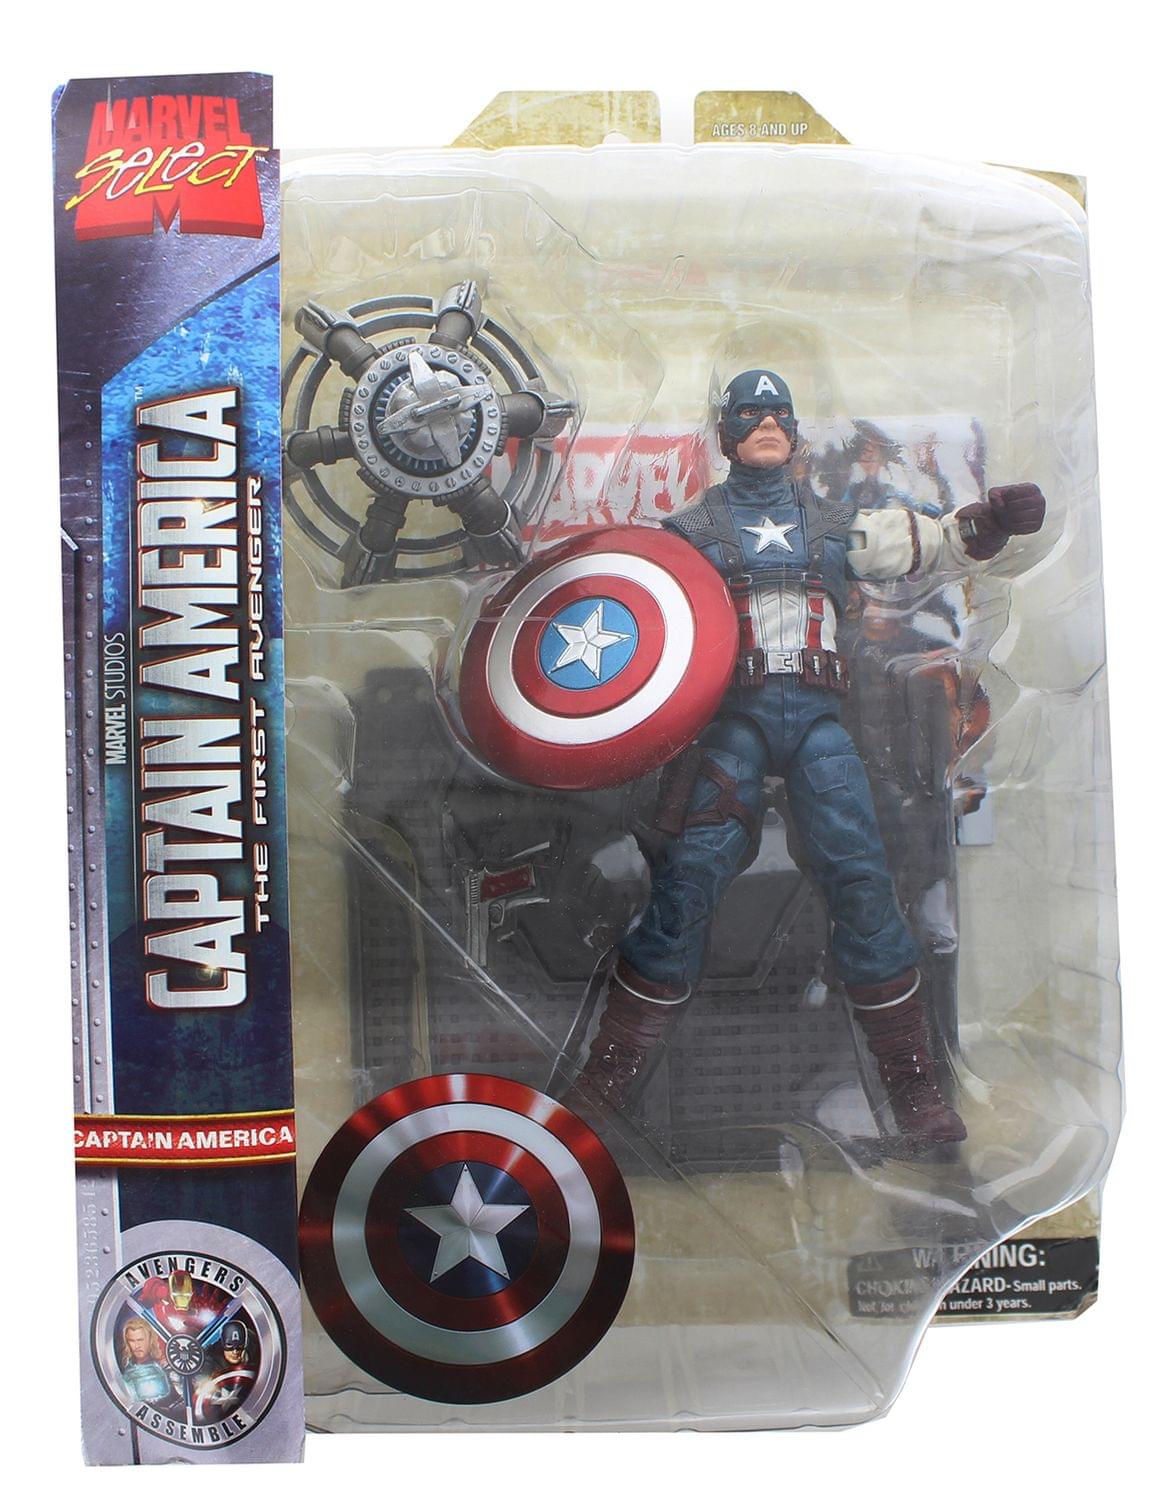 Marvel Select 7 Inch Action Figure - Captain America The First Avenger